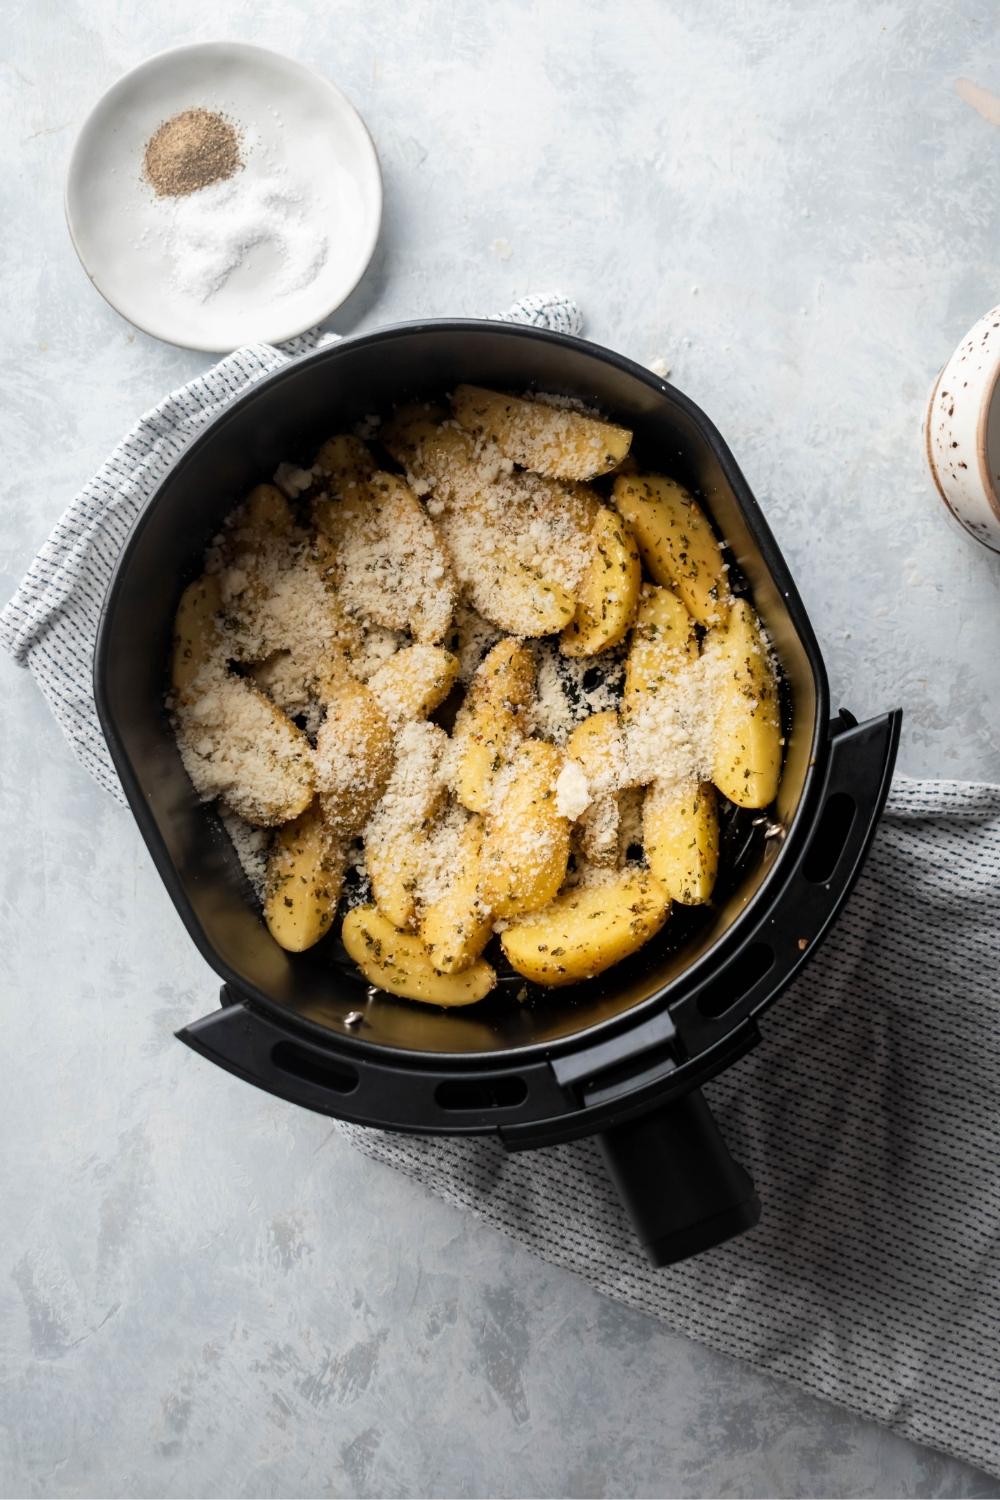 An air fryer filled with potato wedges with Parmesan cheese on top.